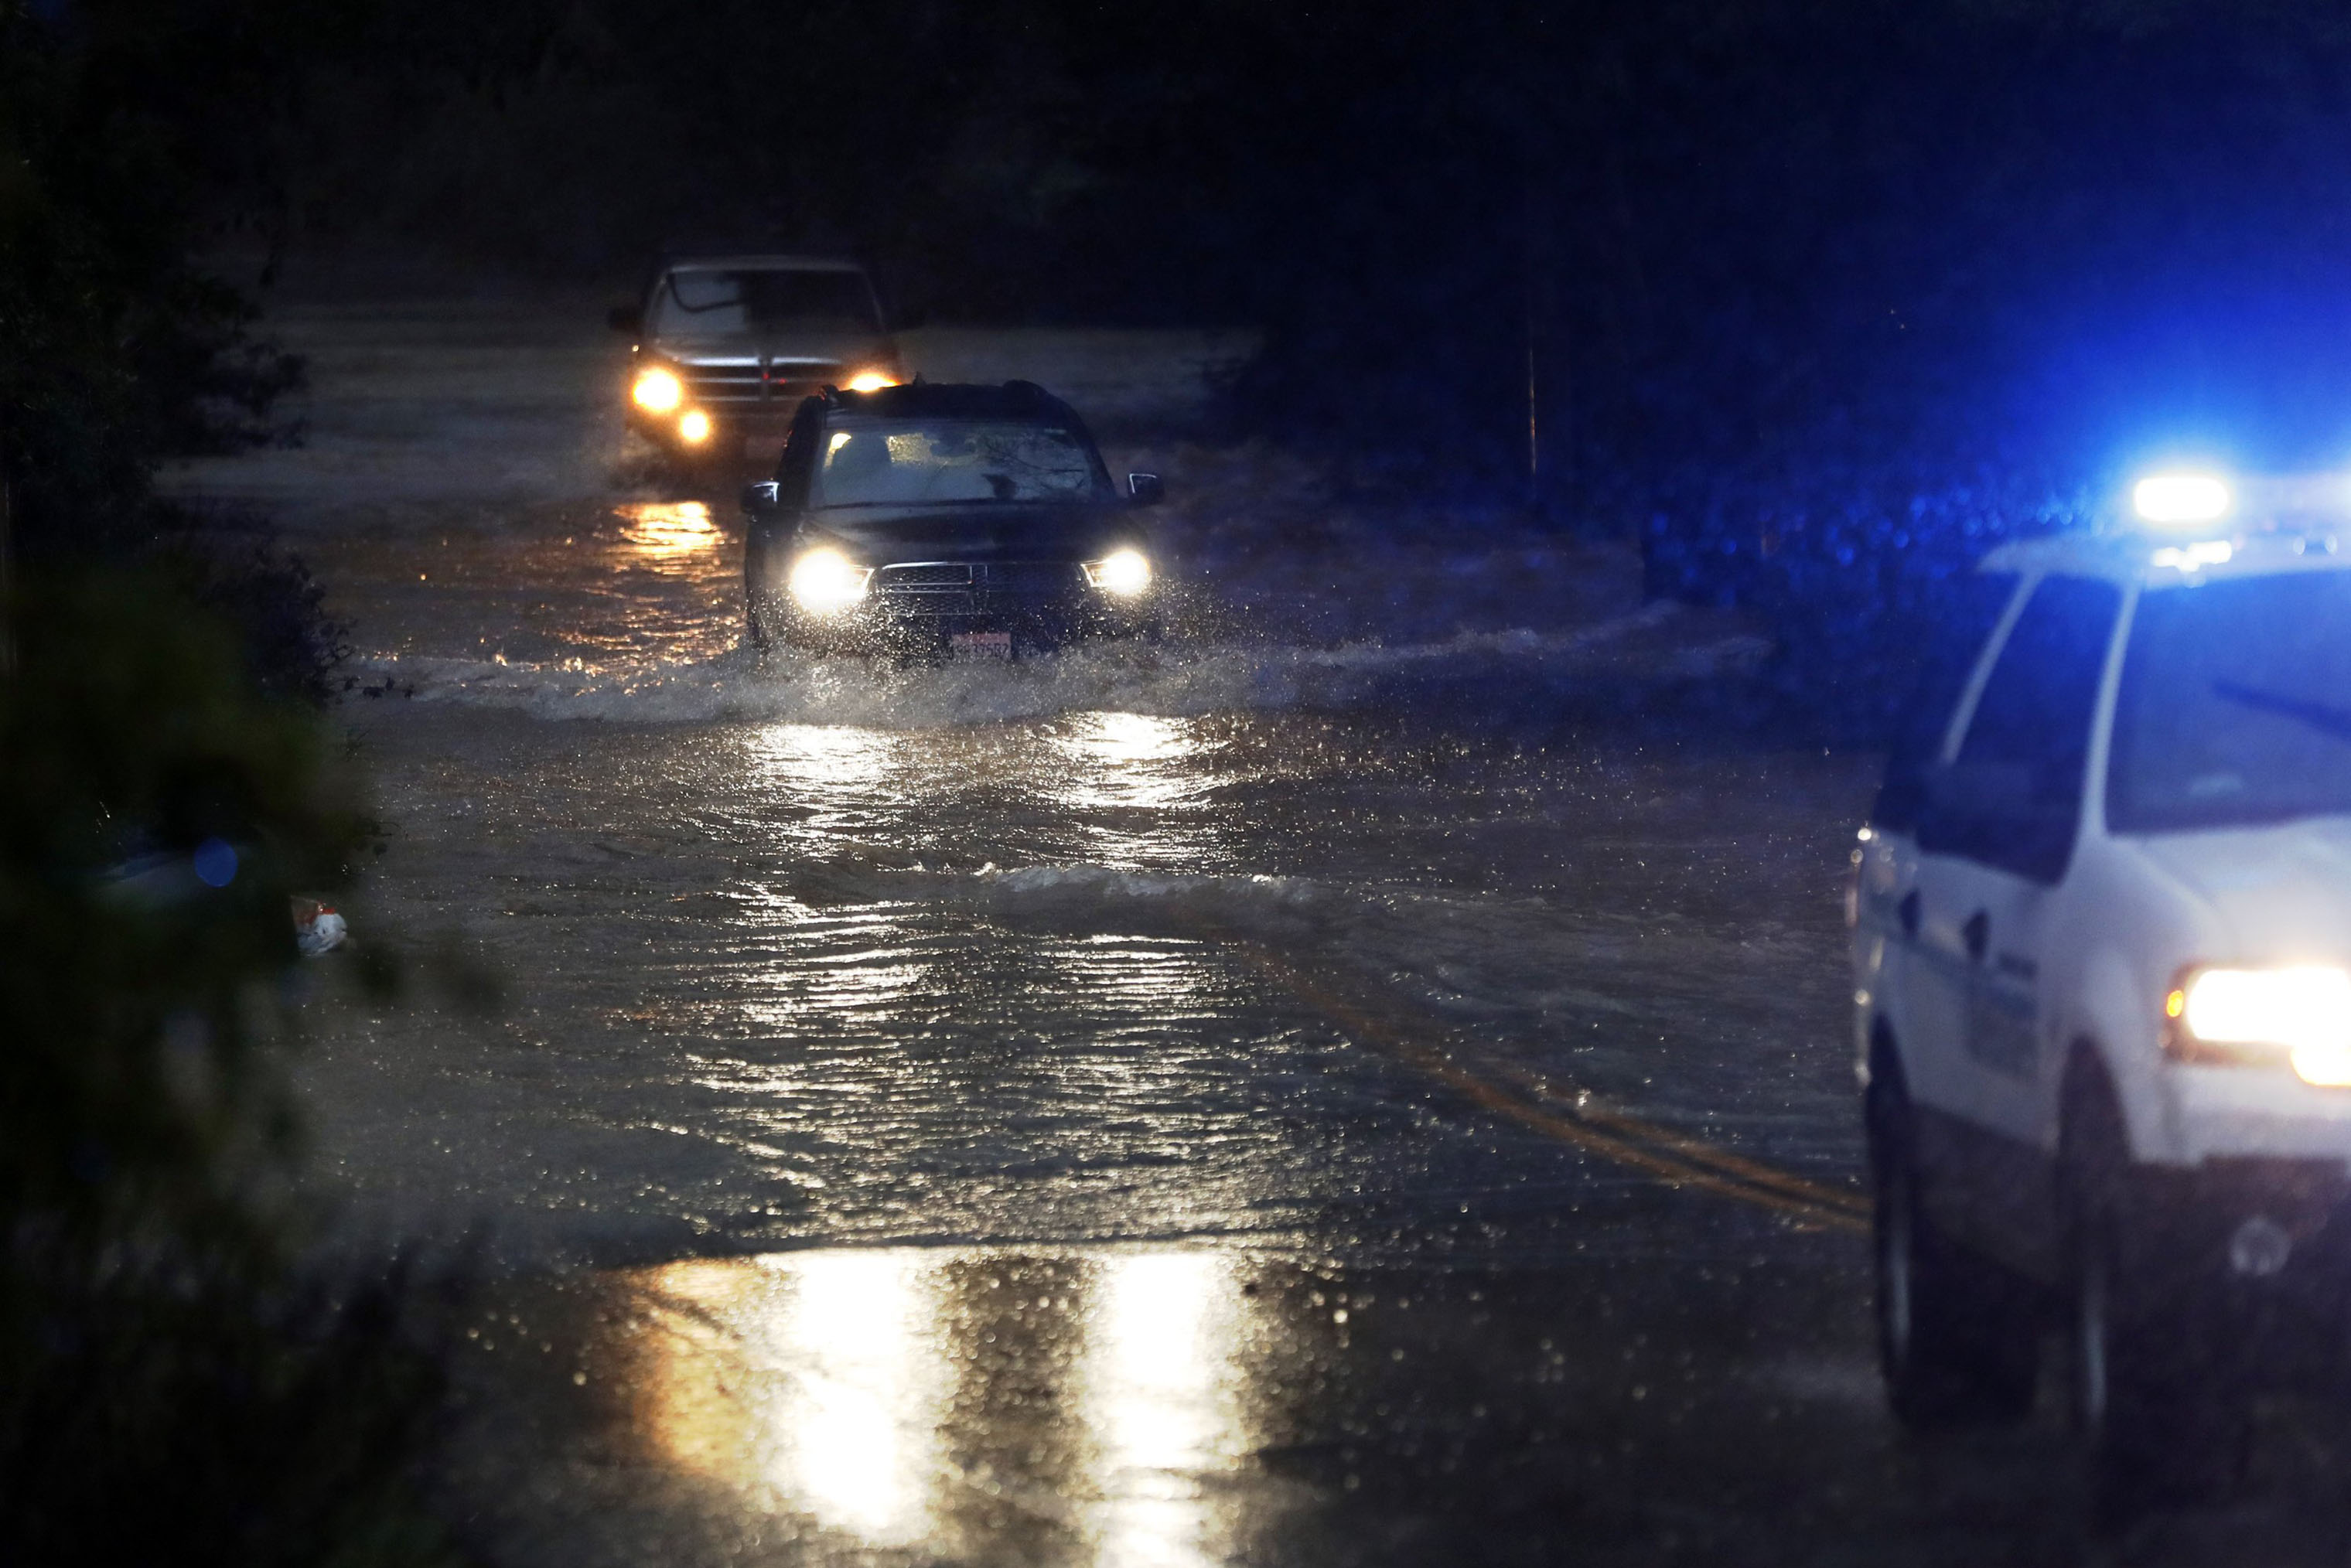 Two vehicles follow a Sonoma County Sheriff's vehicle through flooded Neeley Road as the Russian River rises towards flood stage in Guerneville, California on Feb. 26, 2019. The Sonoma County Sheriff's Office issued mandatory evacuations in communities along the Russian River and urged people to "evacuate now." As of 9:32 p.m. on Feb. 26, the river had reached 35.1 feet. (Scott Strazzante—San Francisco Chronicle/Polaris)